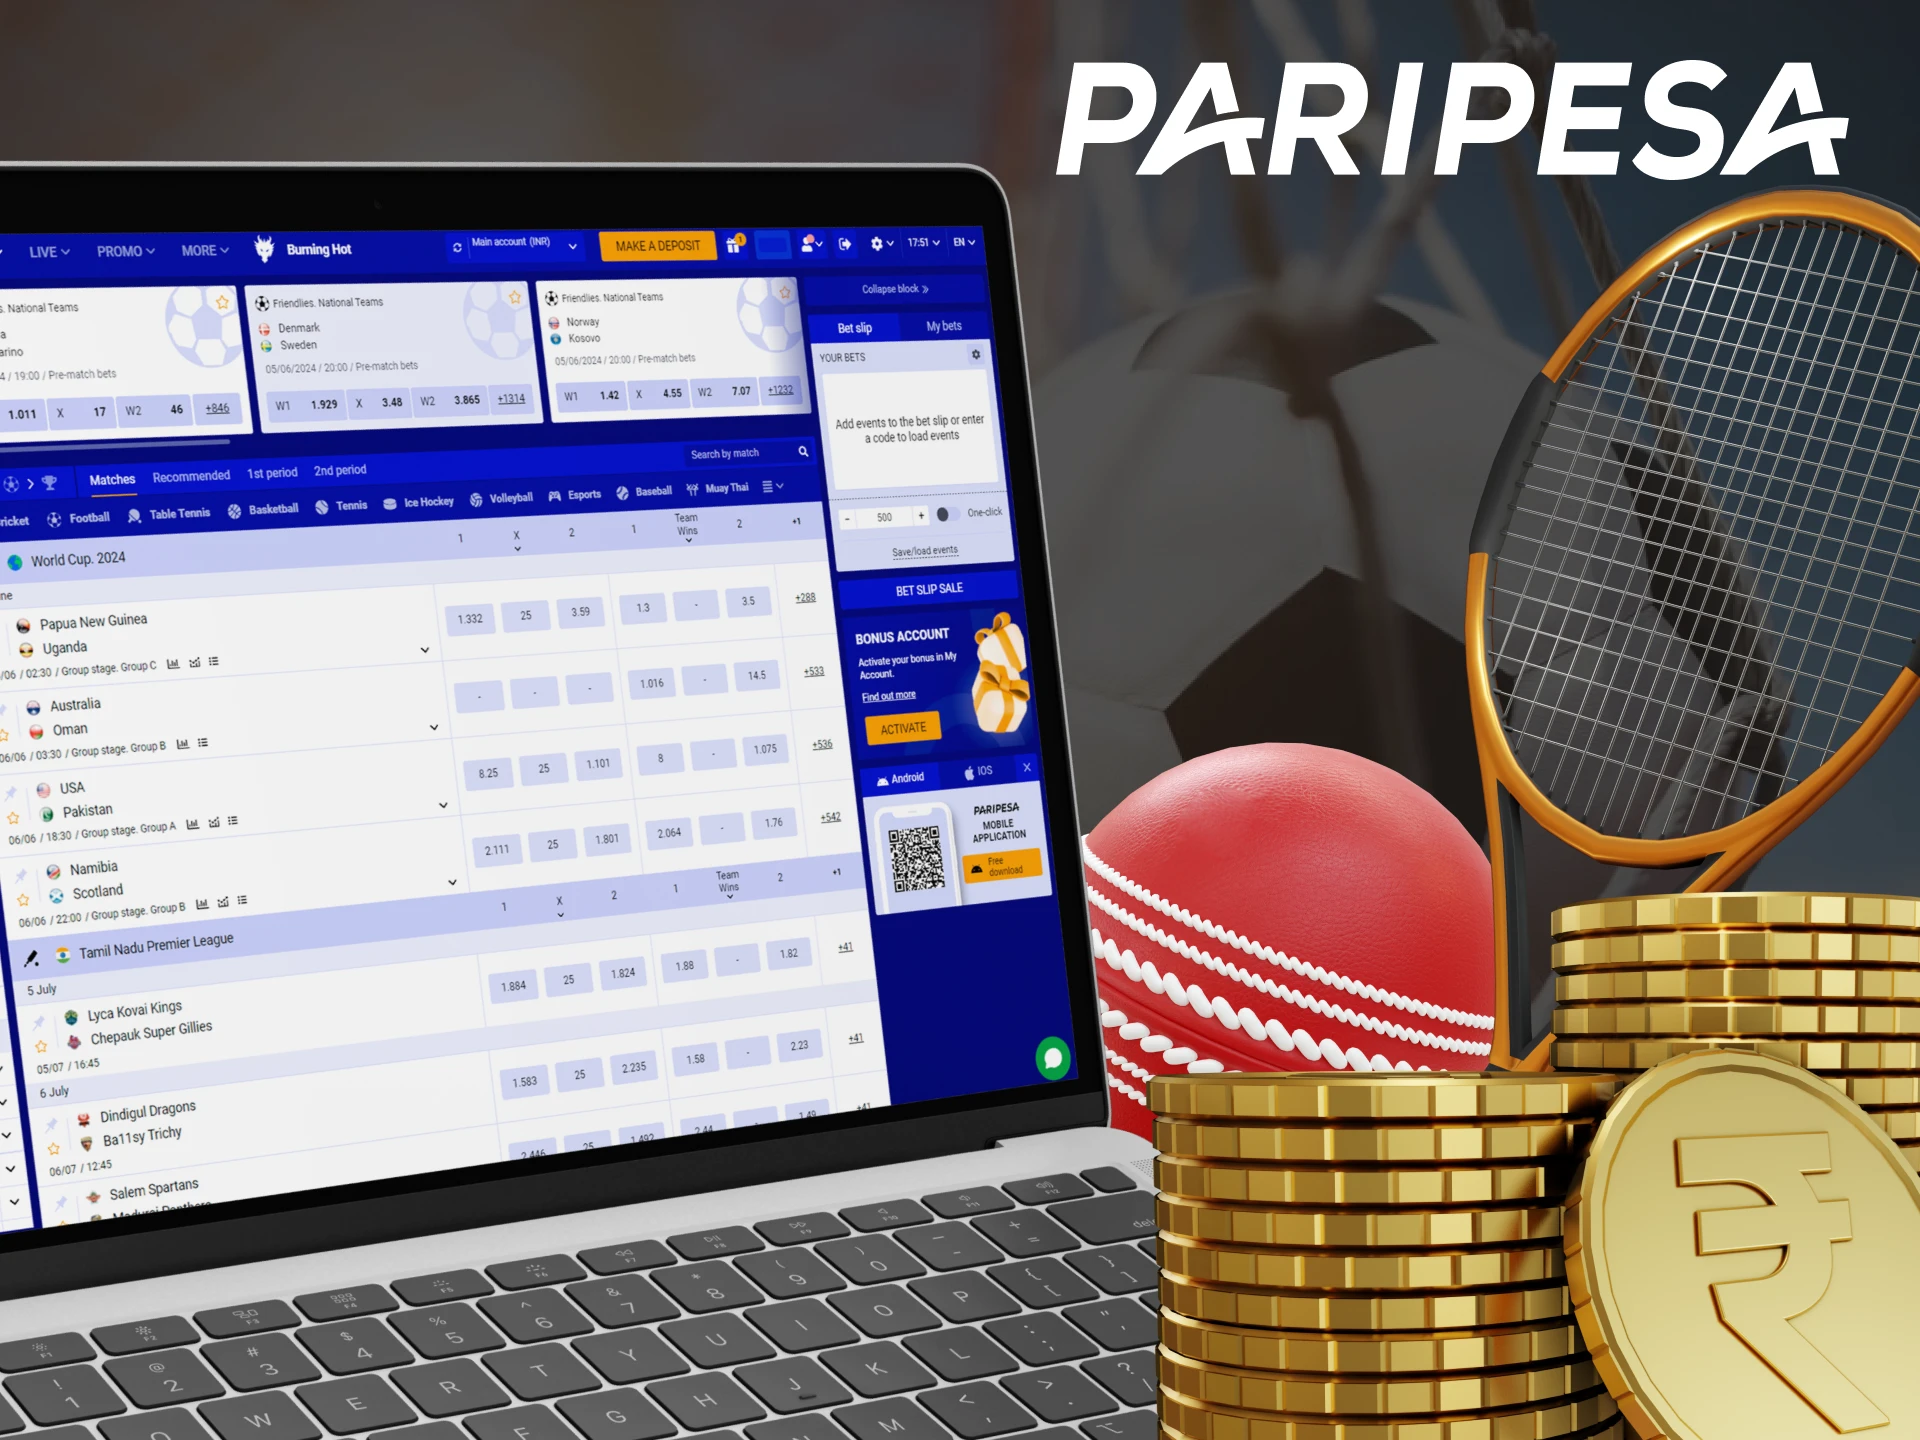 To bet on sports at Paripesa, you need to register.